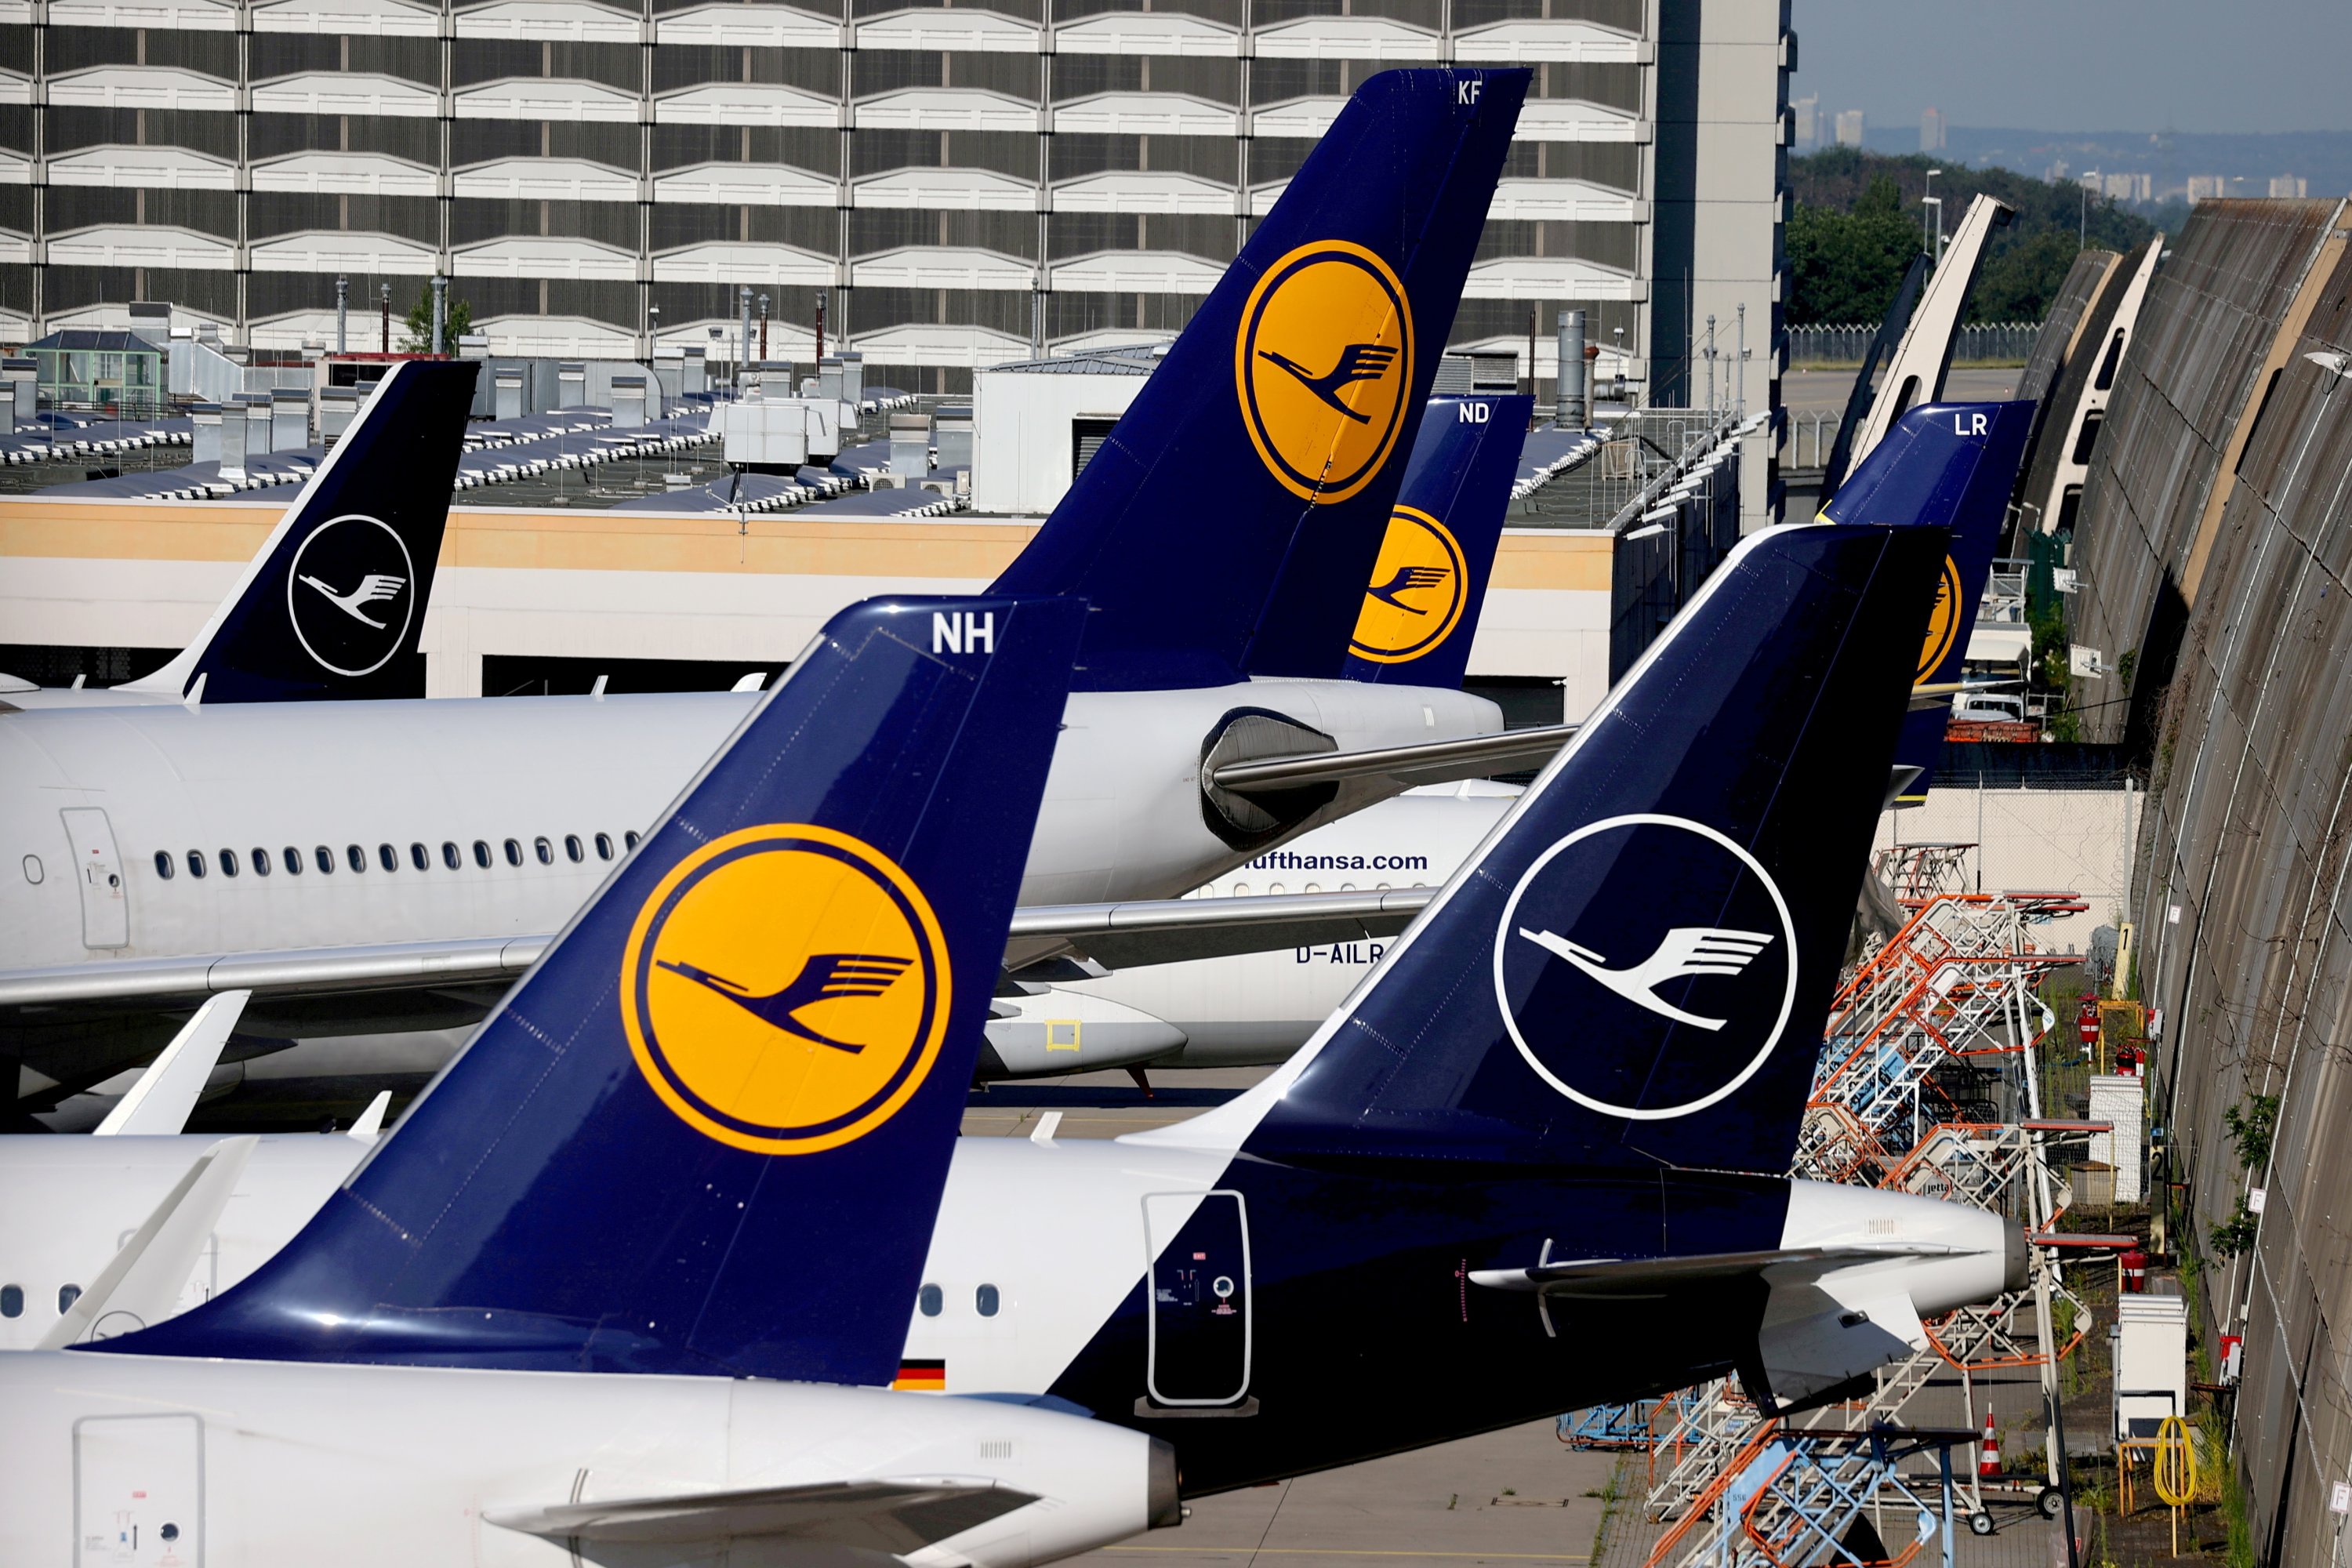 German carrier Lufthansa pays off $1.7 billion in bailout cash | Daily Sabah